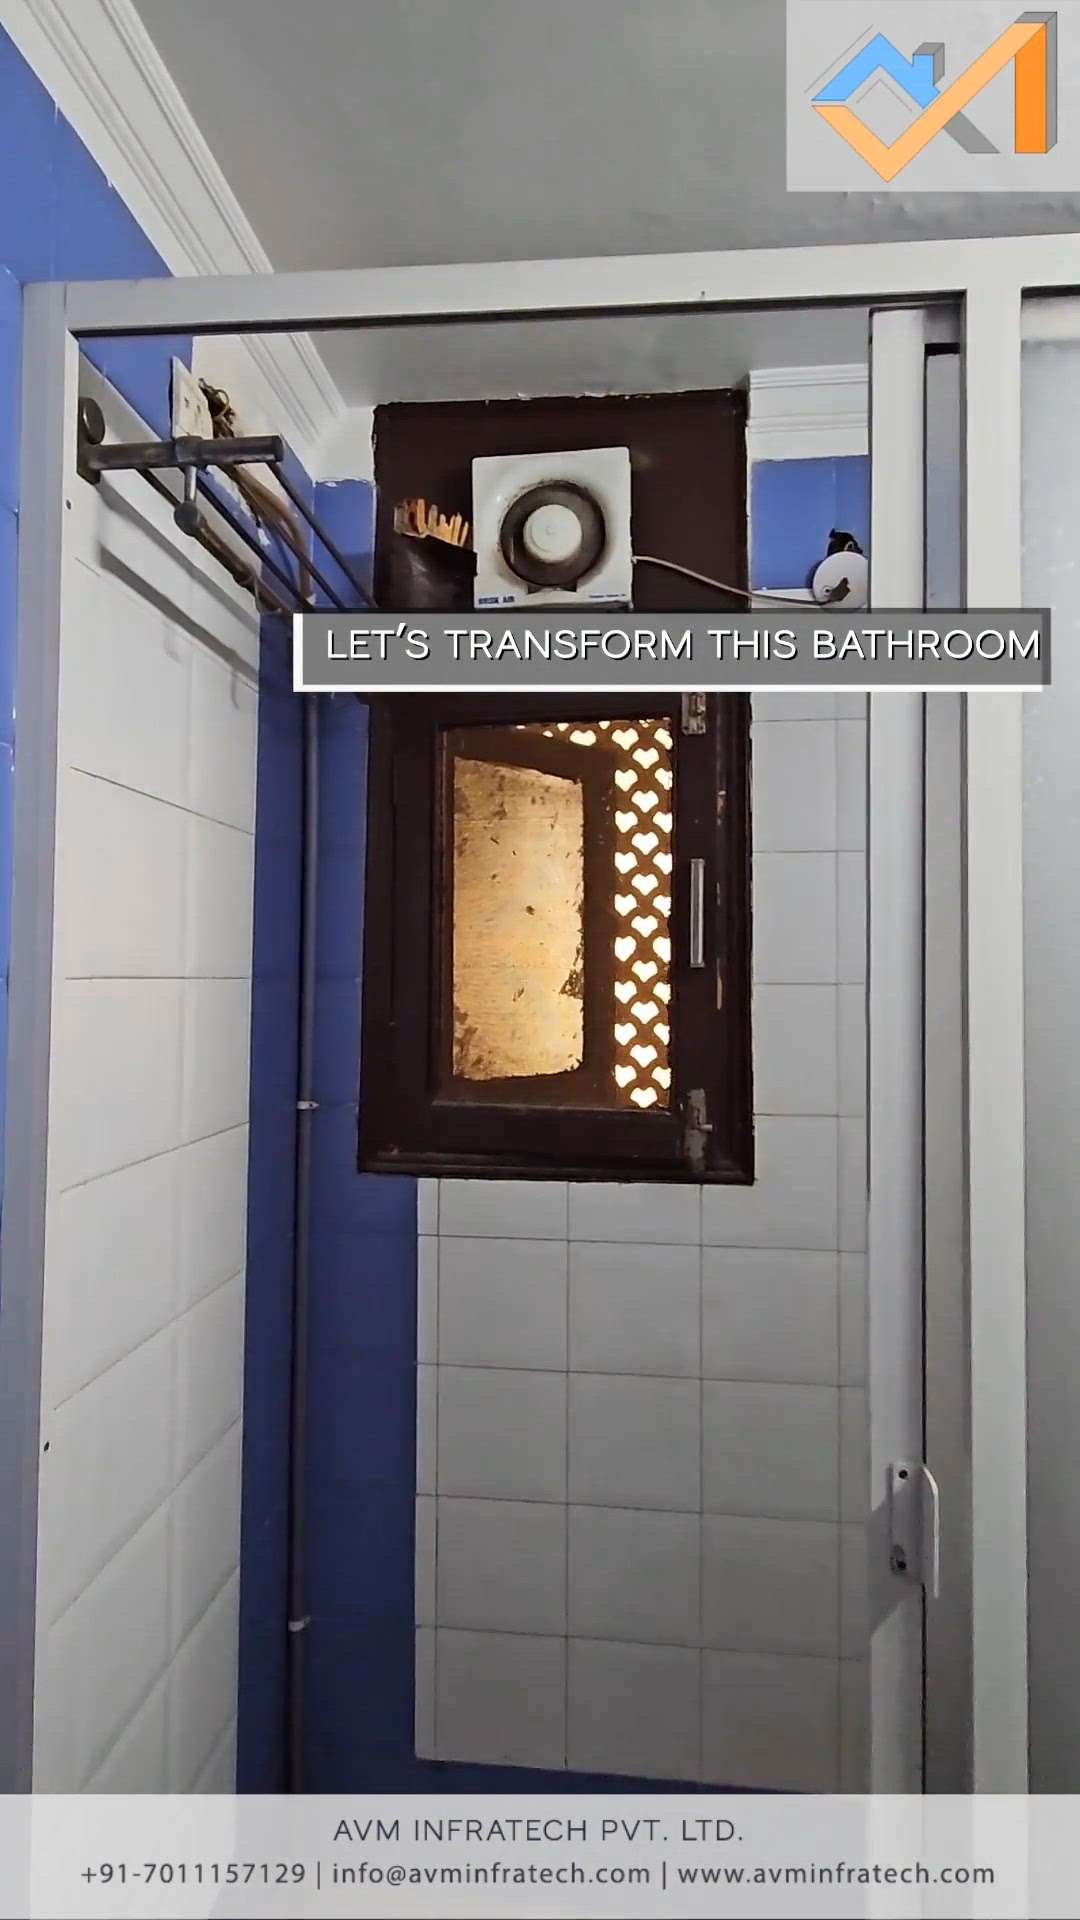 Transformation of an old bathroom.


Follow us for more such amazing updates. 
.
.
#transformation #transformationjourney #transformationchallenge #transformations #bathroom #bathroomdesign #bathroomdecor #bathroomremodel #bathroomrenovation #bathroominspiration #bathroomideas #bathroomdecoration #avminfratech #bathroomgoals #renovation